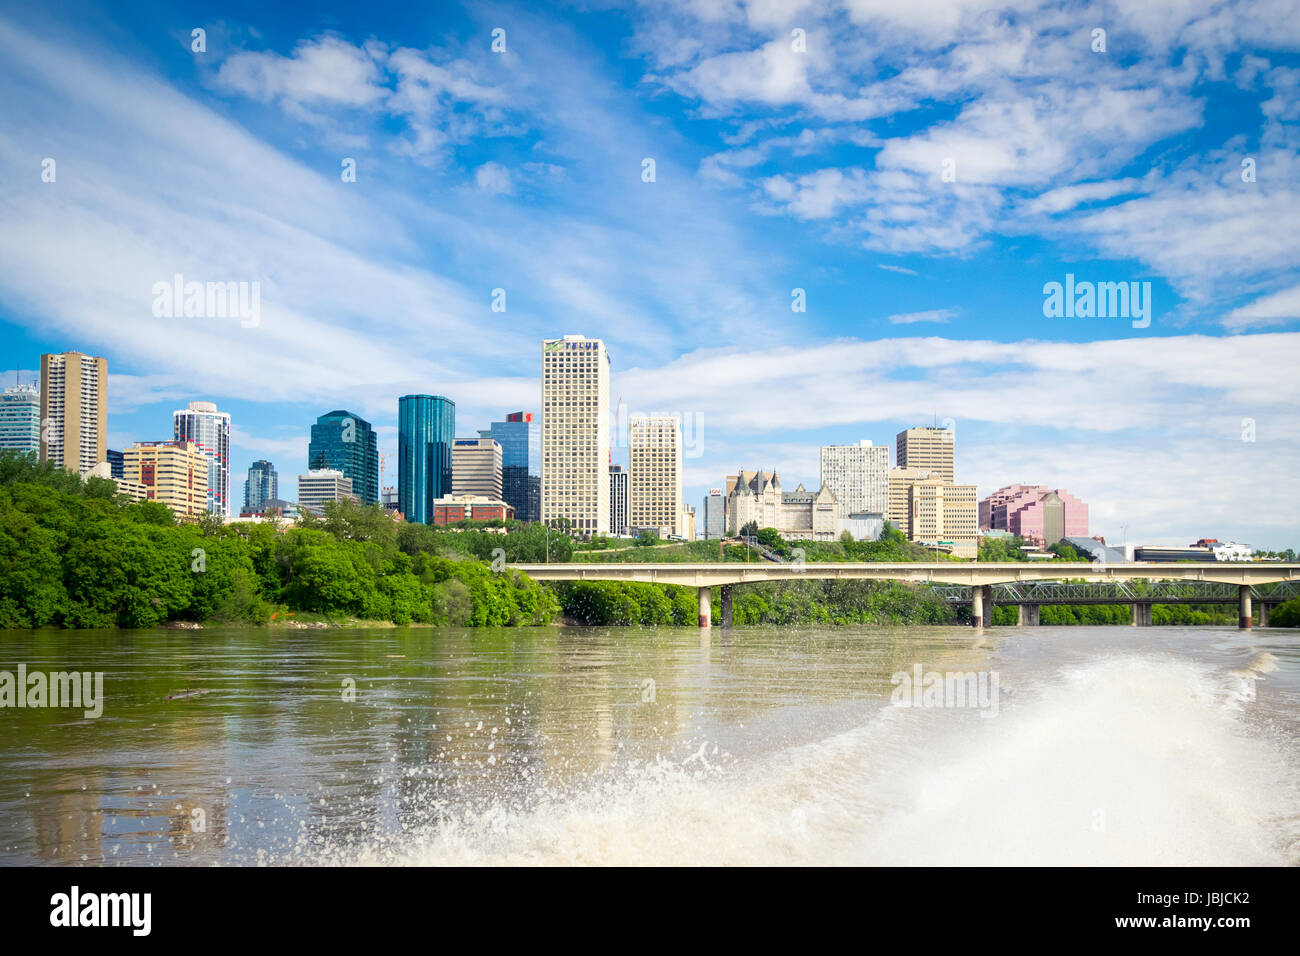 The summer skyline of the city of Edmonton, Alberta, Canada, as seen from a speedboat in the middle of the North Saskatchewan River. Stock Photo